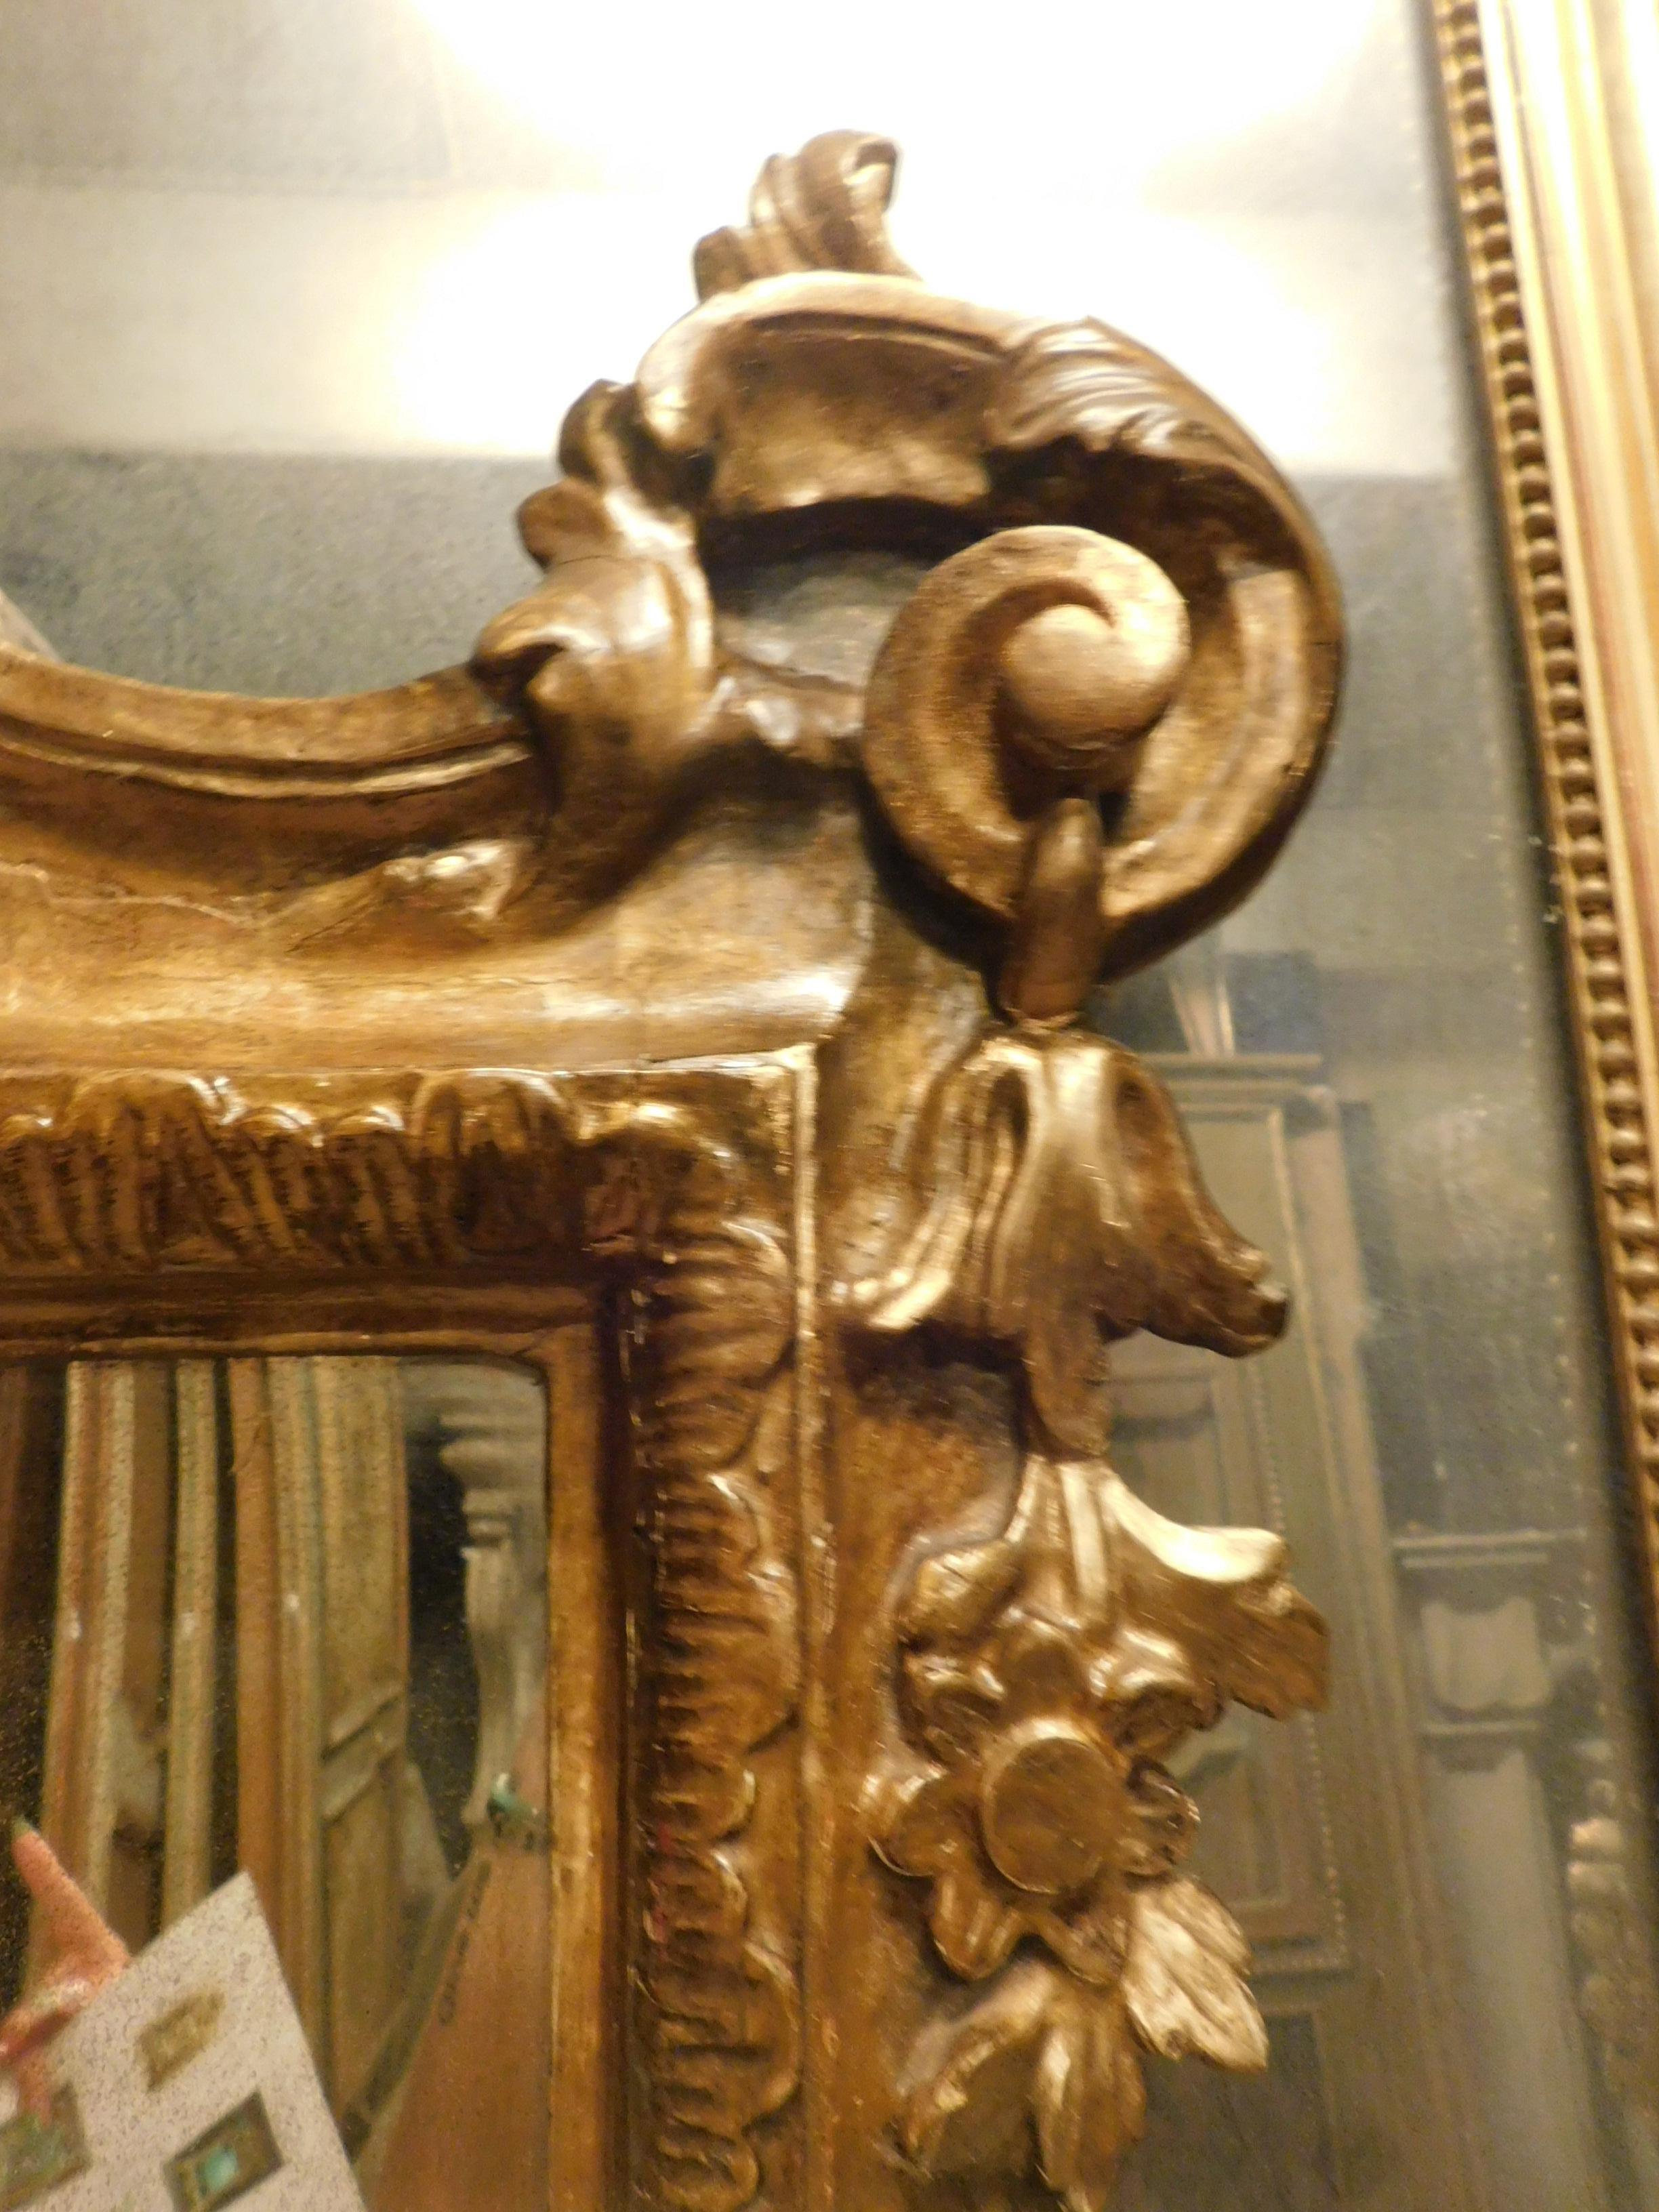 Hand-Carved Antique Mirror in Gilded and Lacquered Wood, 19th Century Italy For Sale